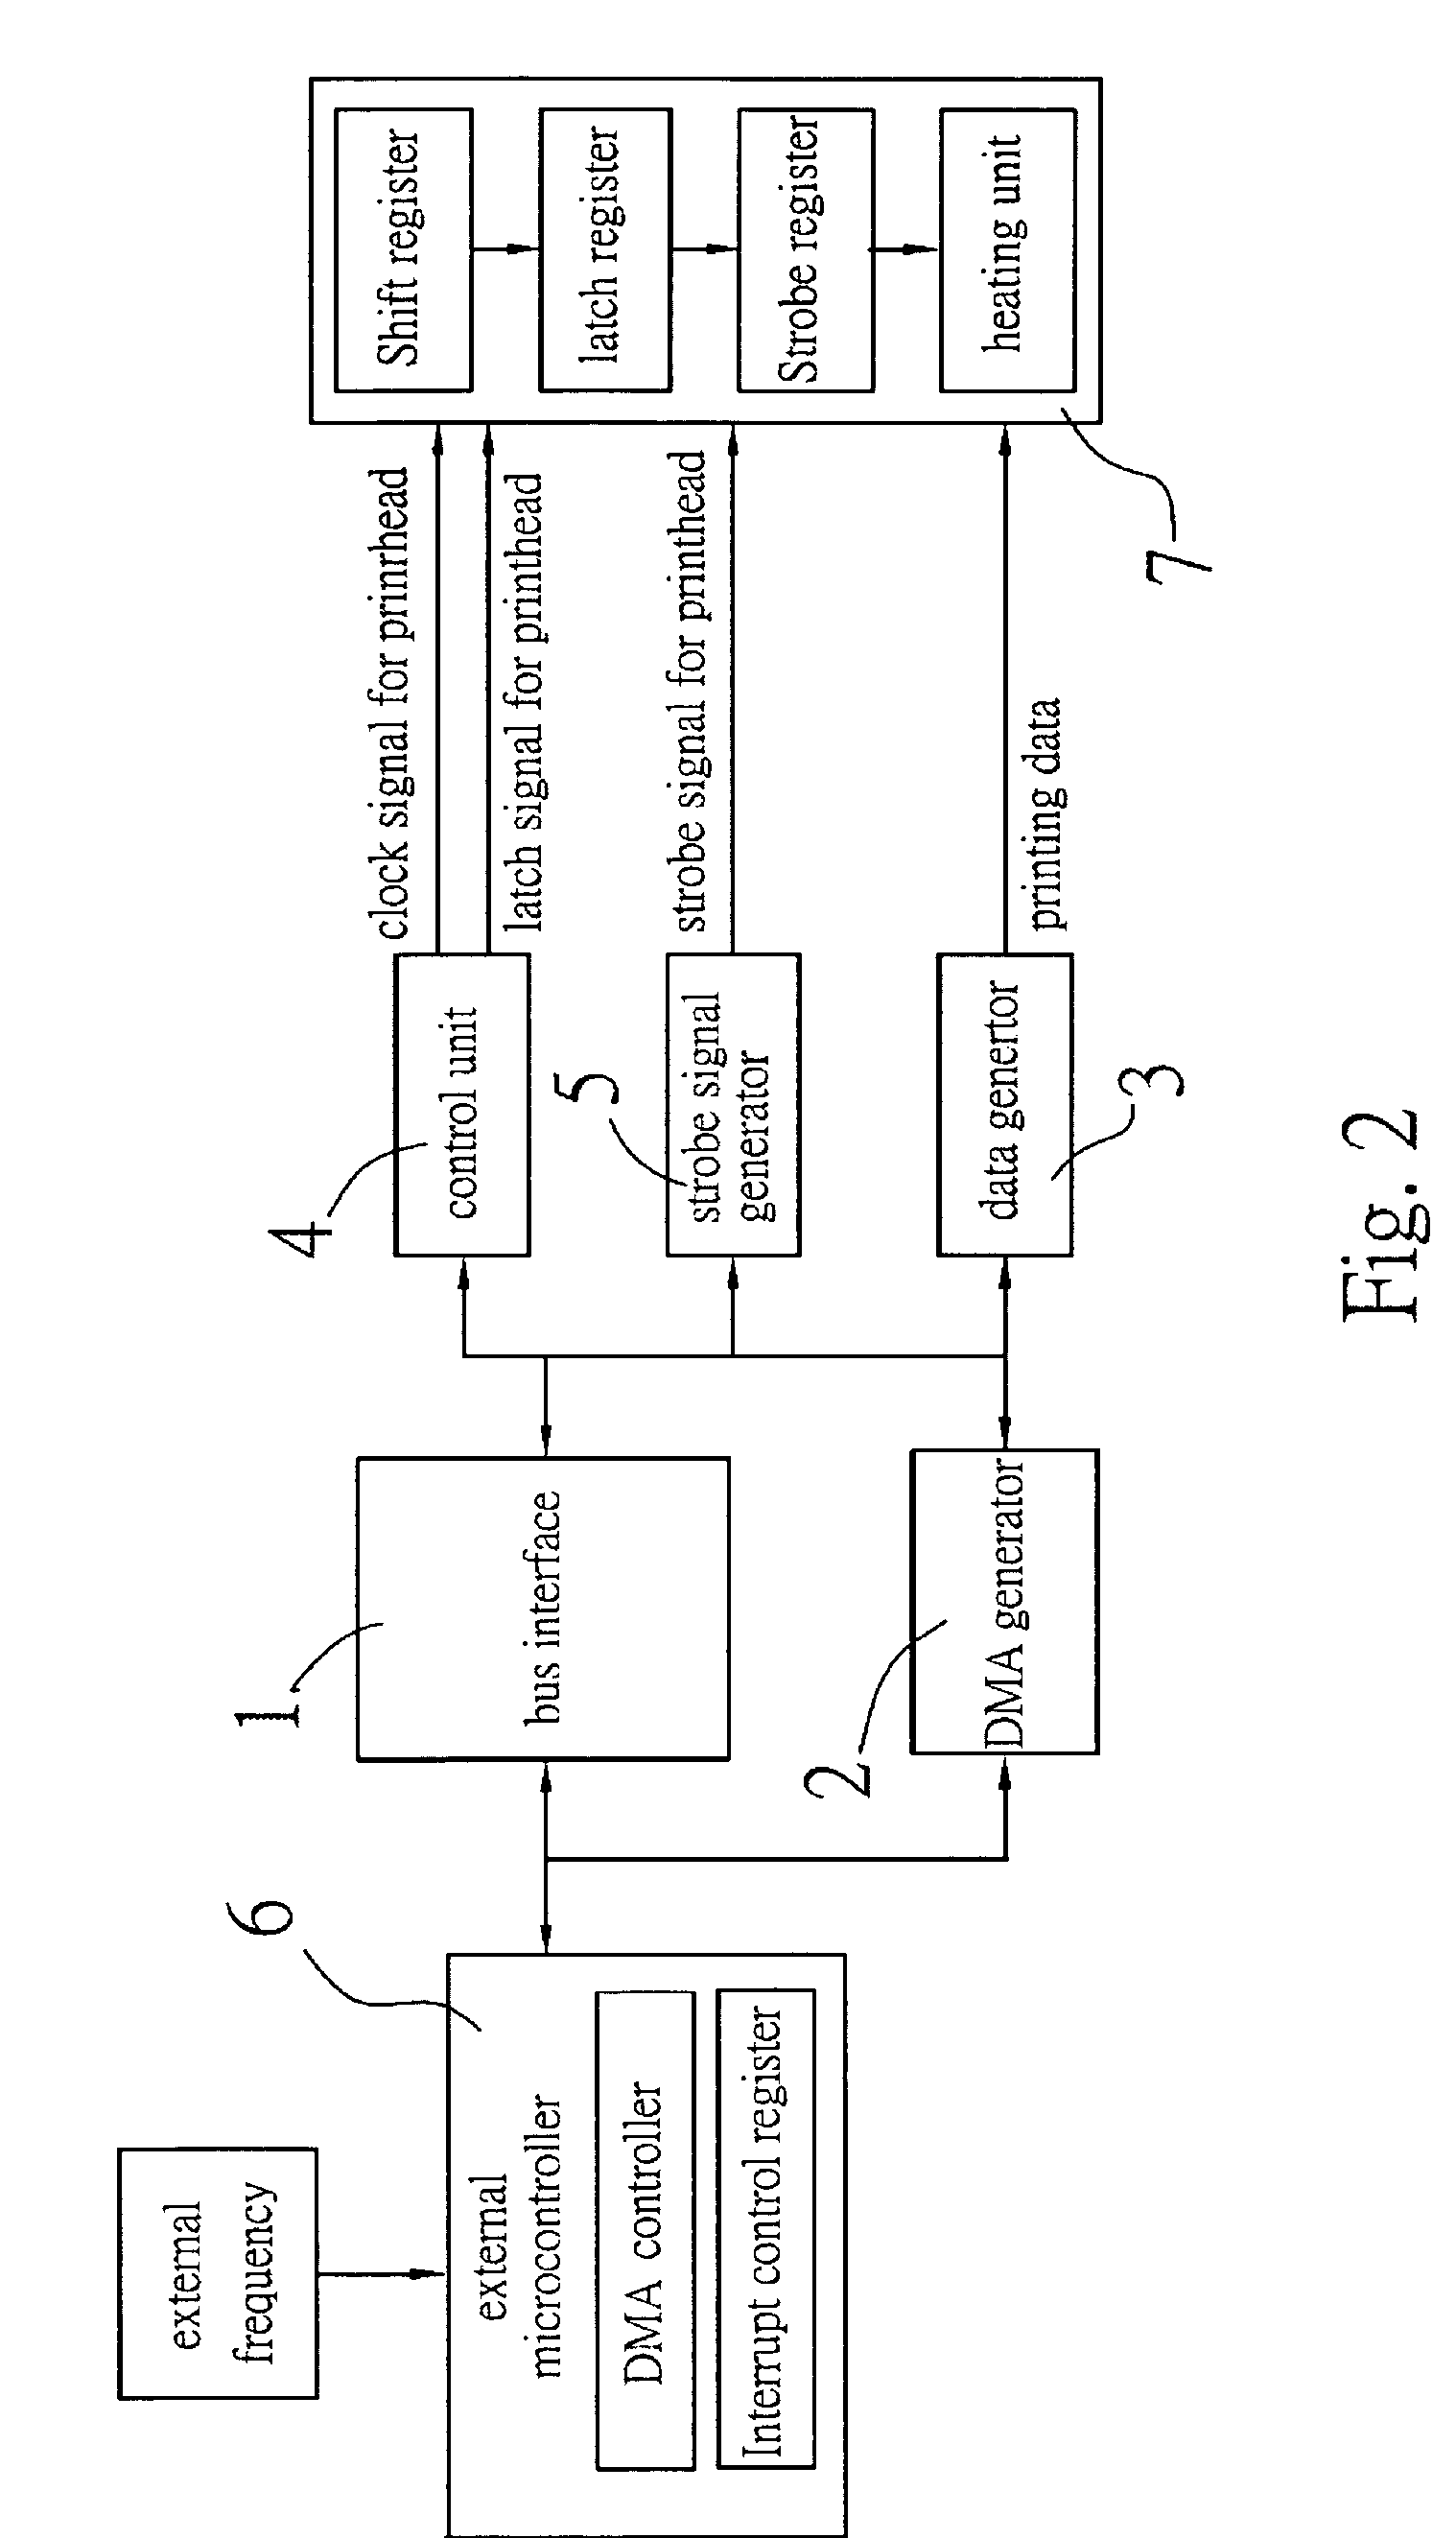 Apparatus and method for multichannel sequence transmission and control